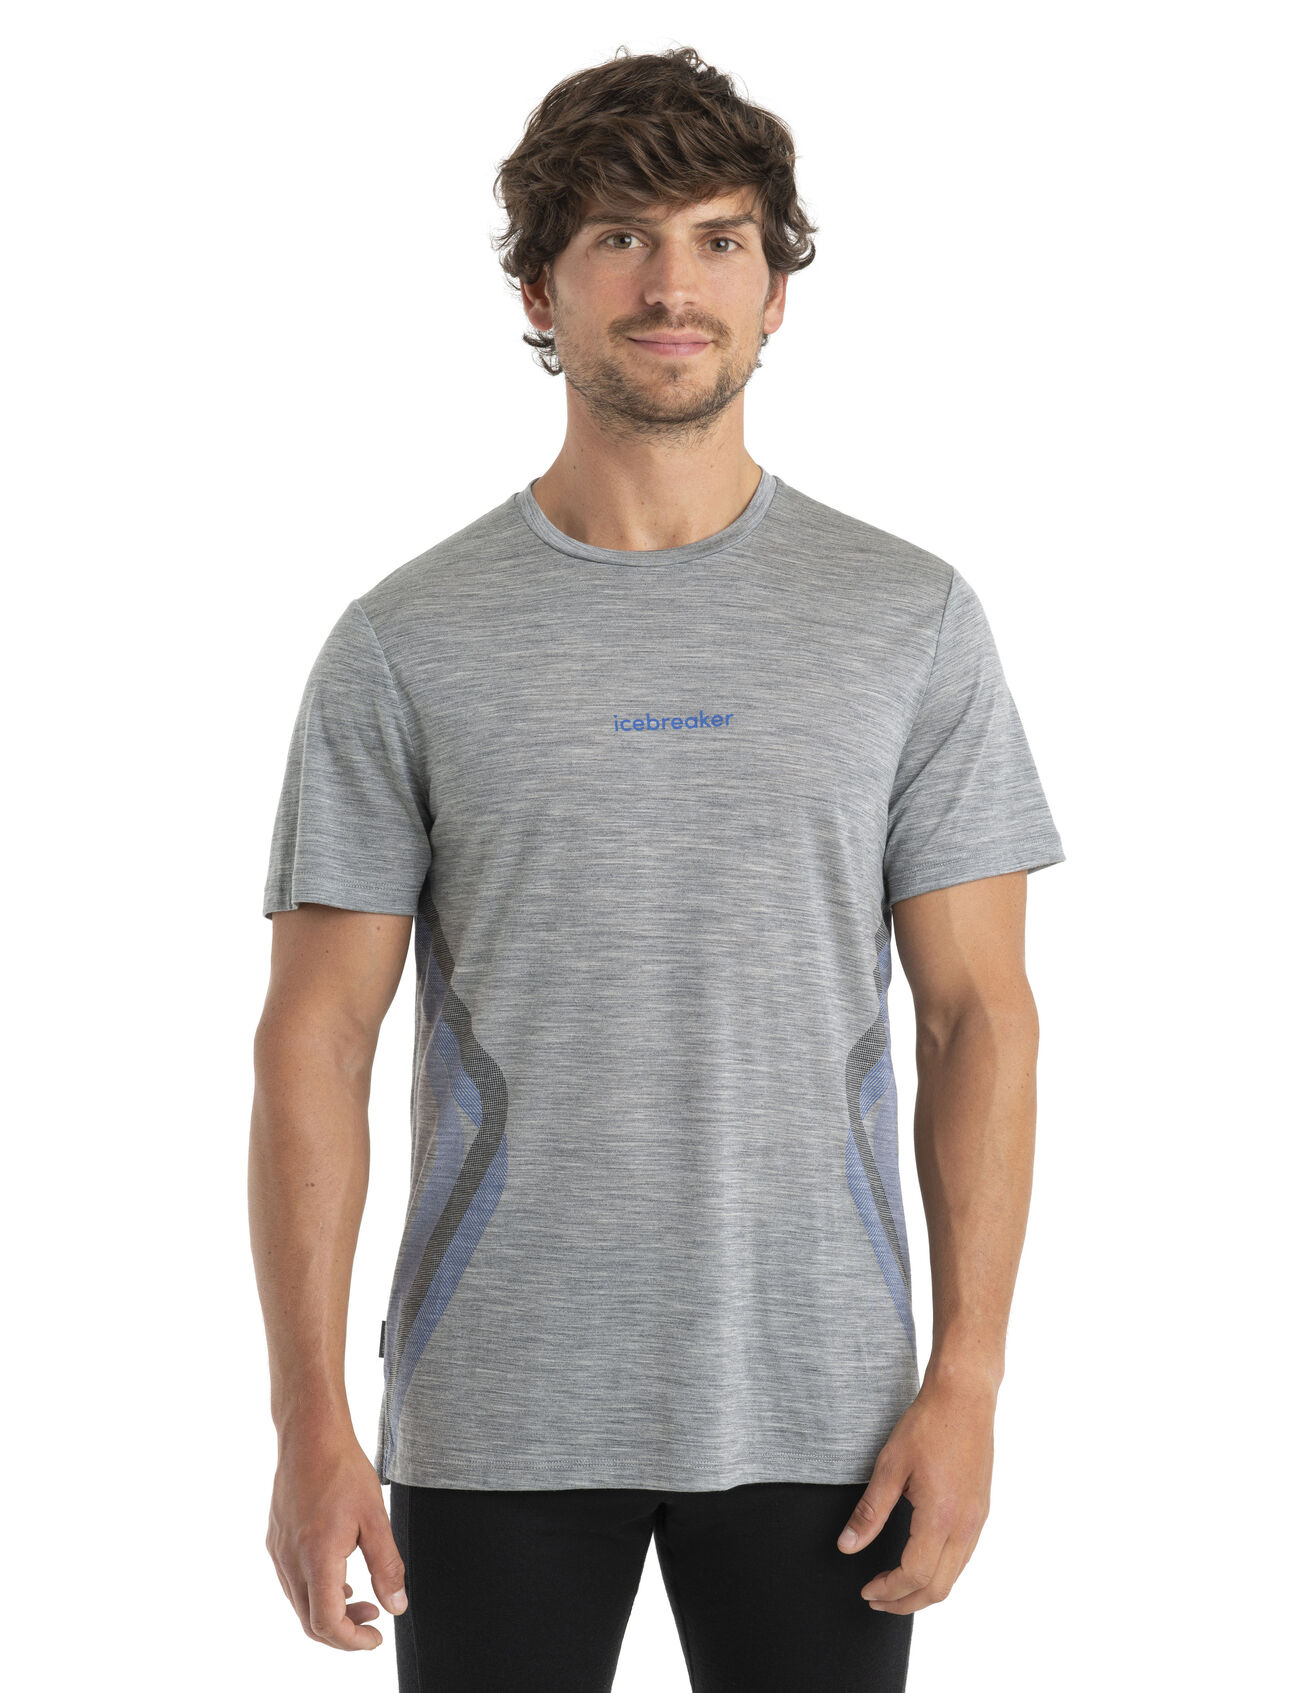 Mens 125 Cool-Lite™ Merino Sphere II Short Sleeve T-Shirt Synergism A soft merino-blend tee made with our lightweight Cool-Lite™ jersey fabric, the 125 Cool-Lite™Sphere II Short Sleeve Tee Synergism provides natural breathability, odour resistance and comfort. The tee's unique graphic print references the soft bend in the trail, and icebreaker's soft geometric design lines.